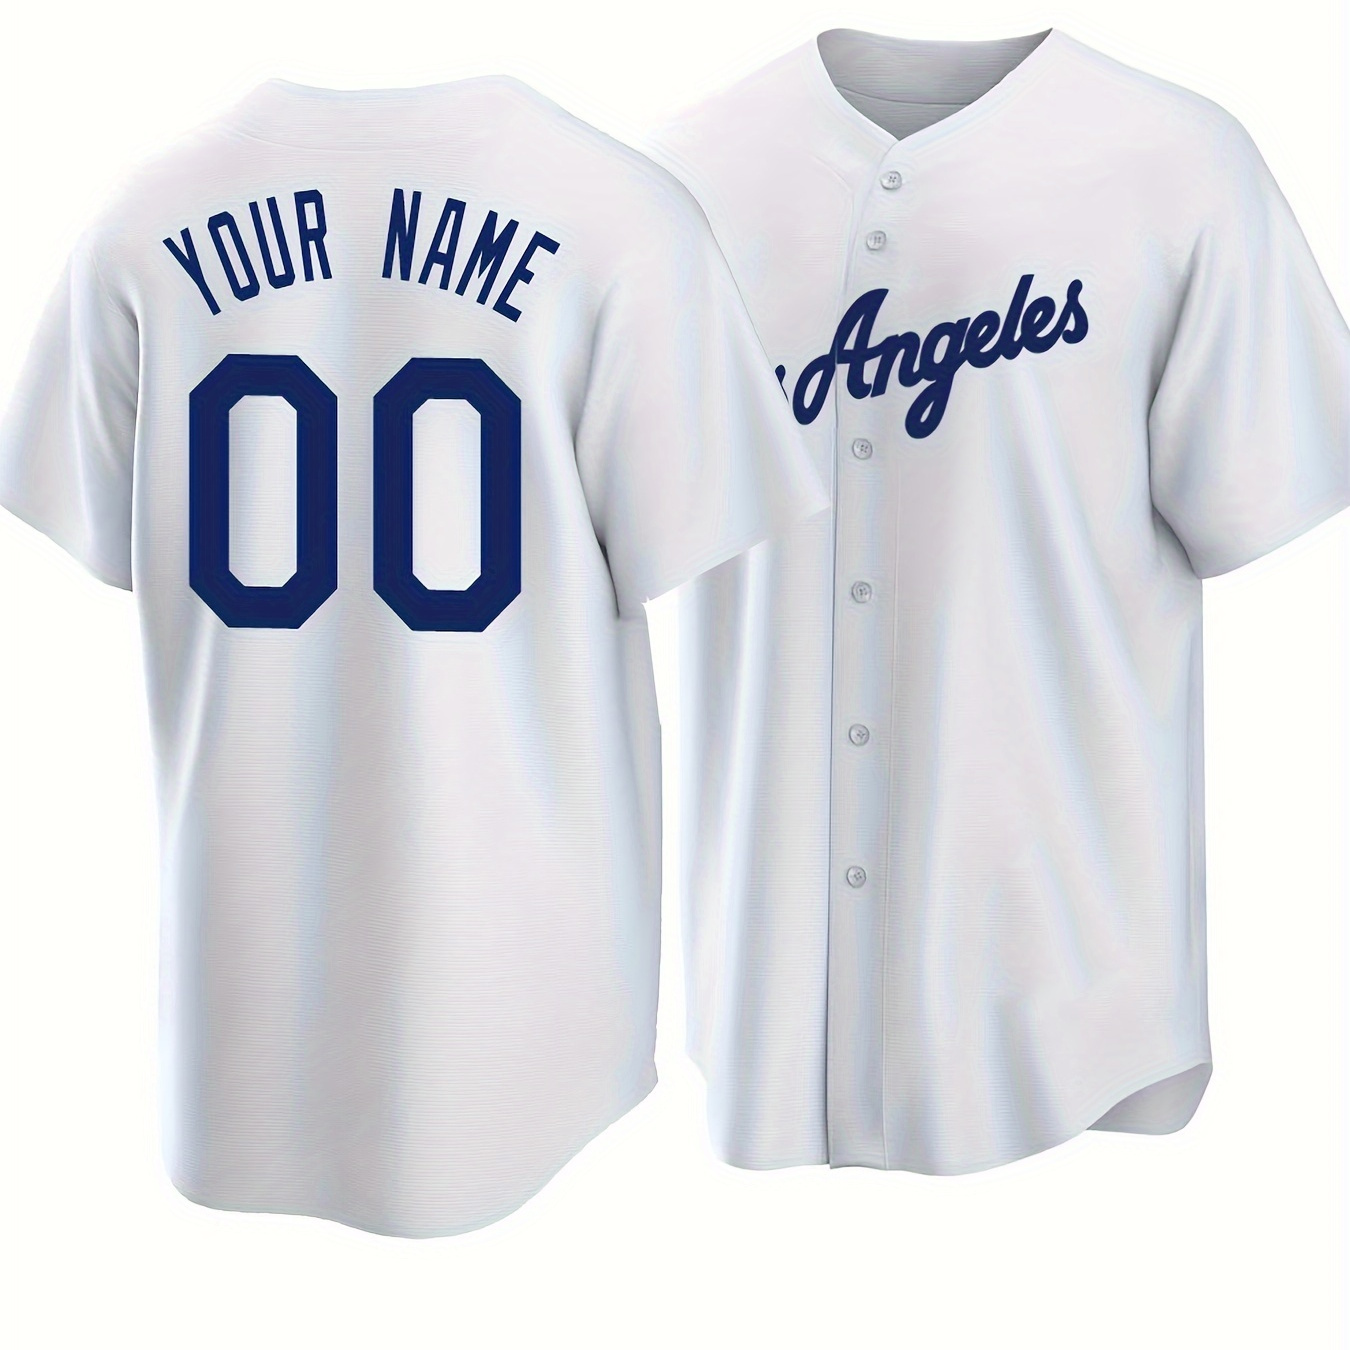 

Men's Customized Baseball Jersey, Embroider Your Personalized Name & Number, Comfy Top For Summer Sport